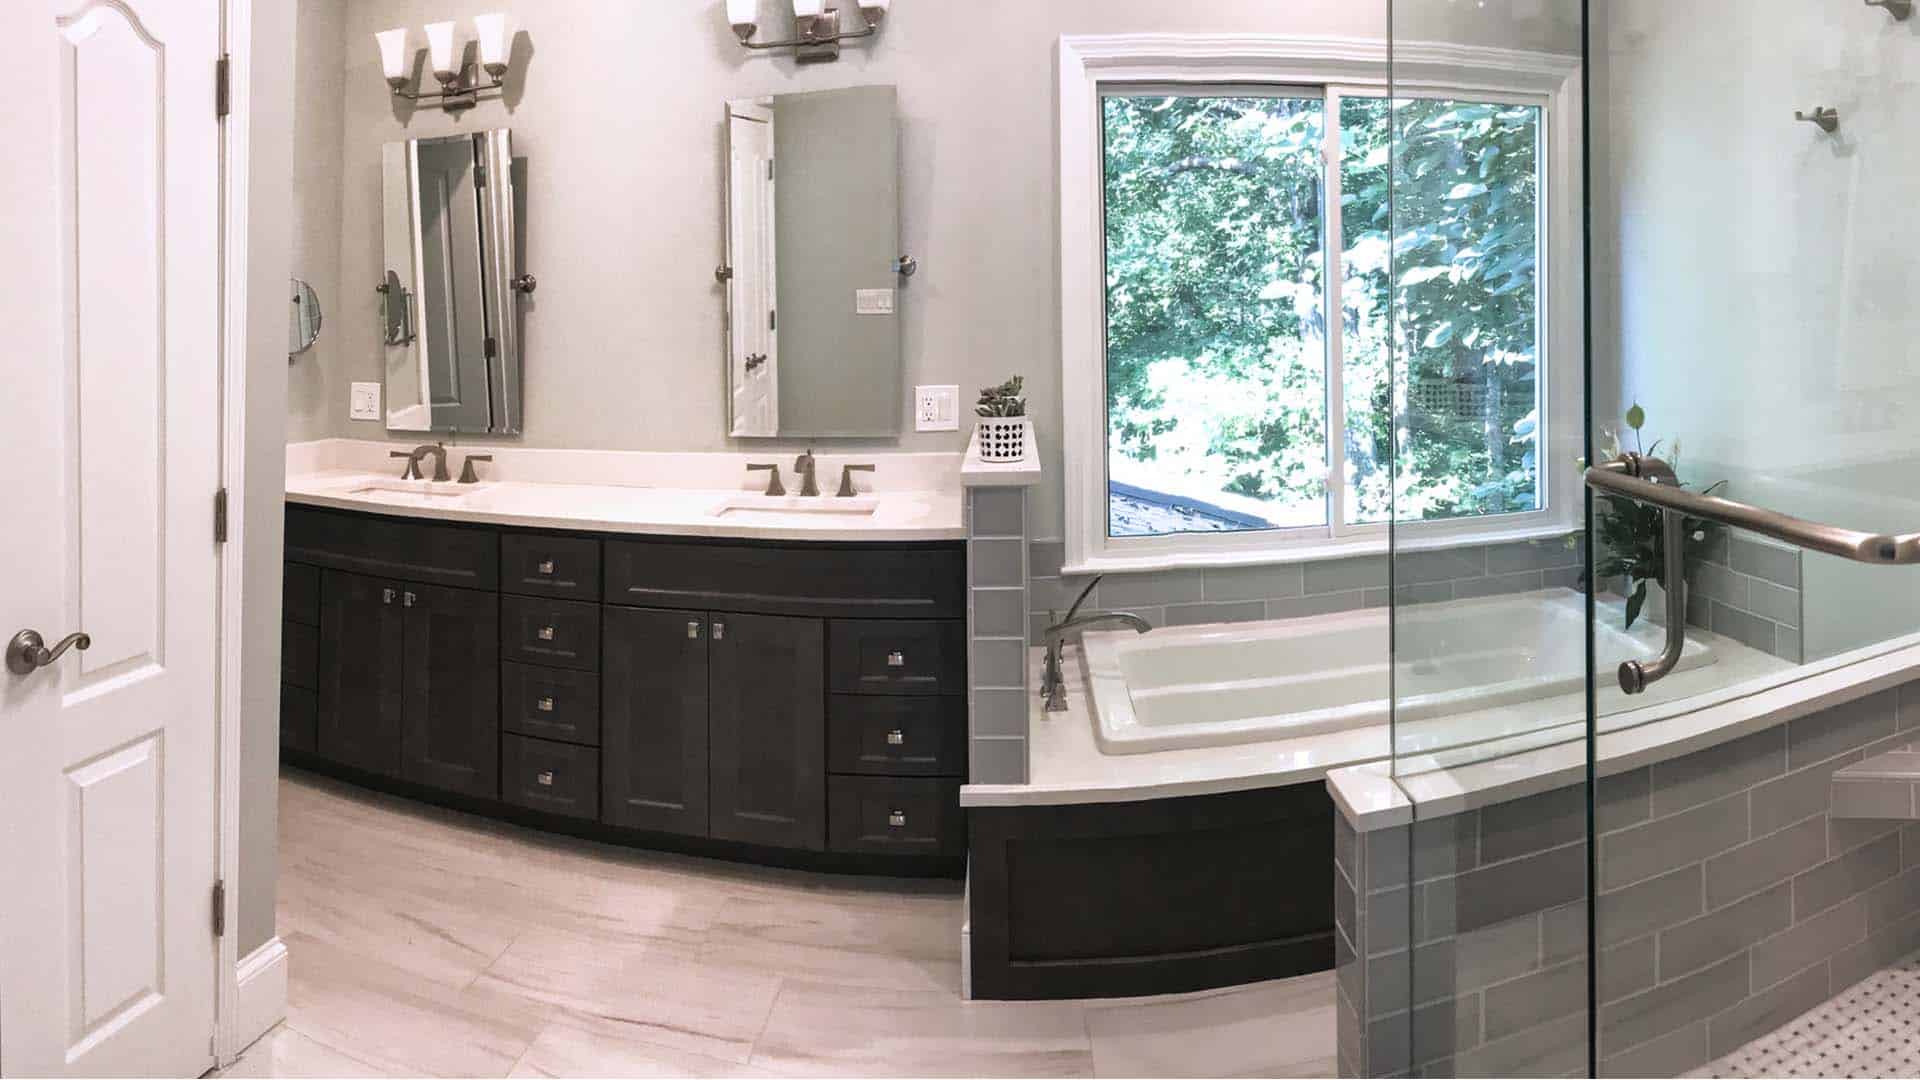 BDM_Residential_Remodeling_1920x1080_Project_Gallery_2015-2020_0035_BDM_Remodeling_GL-Bathroom-05_22FEB2019